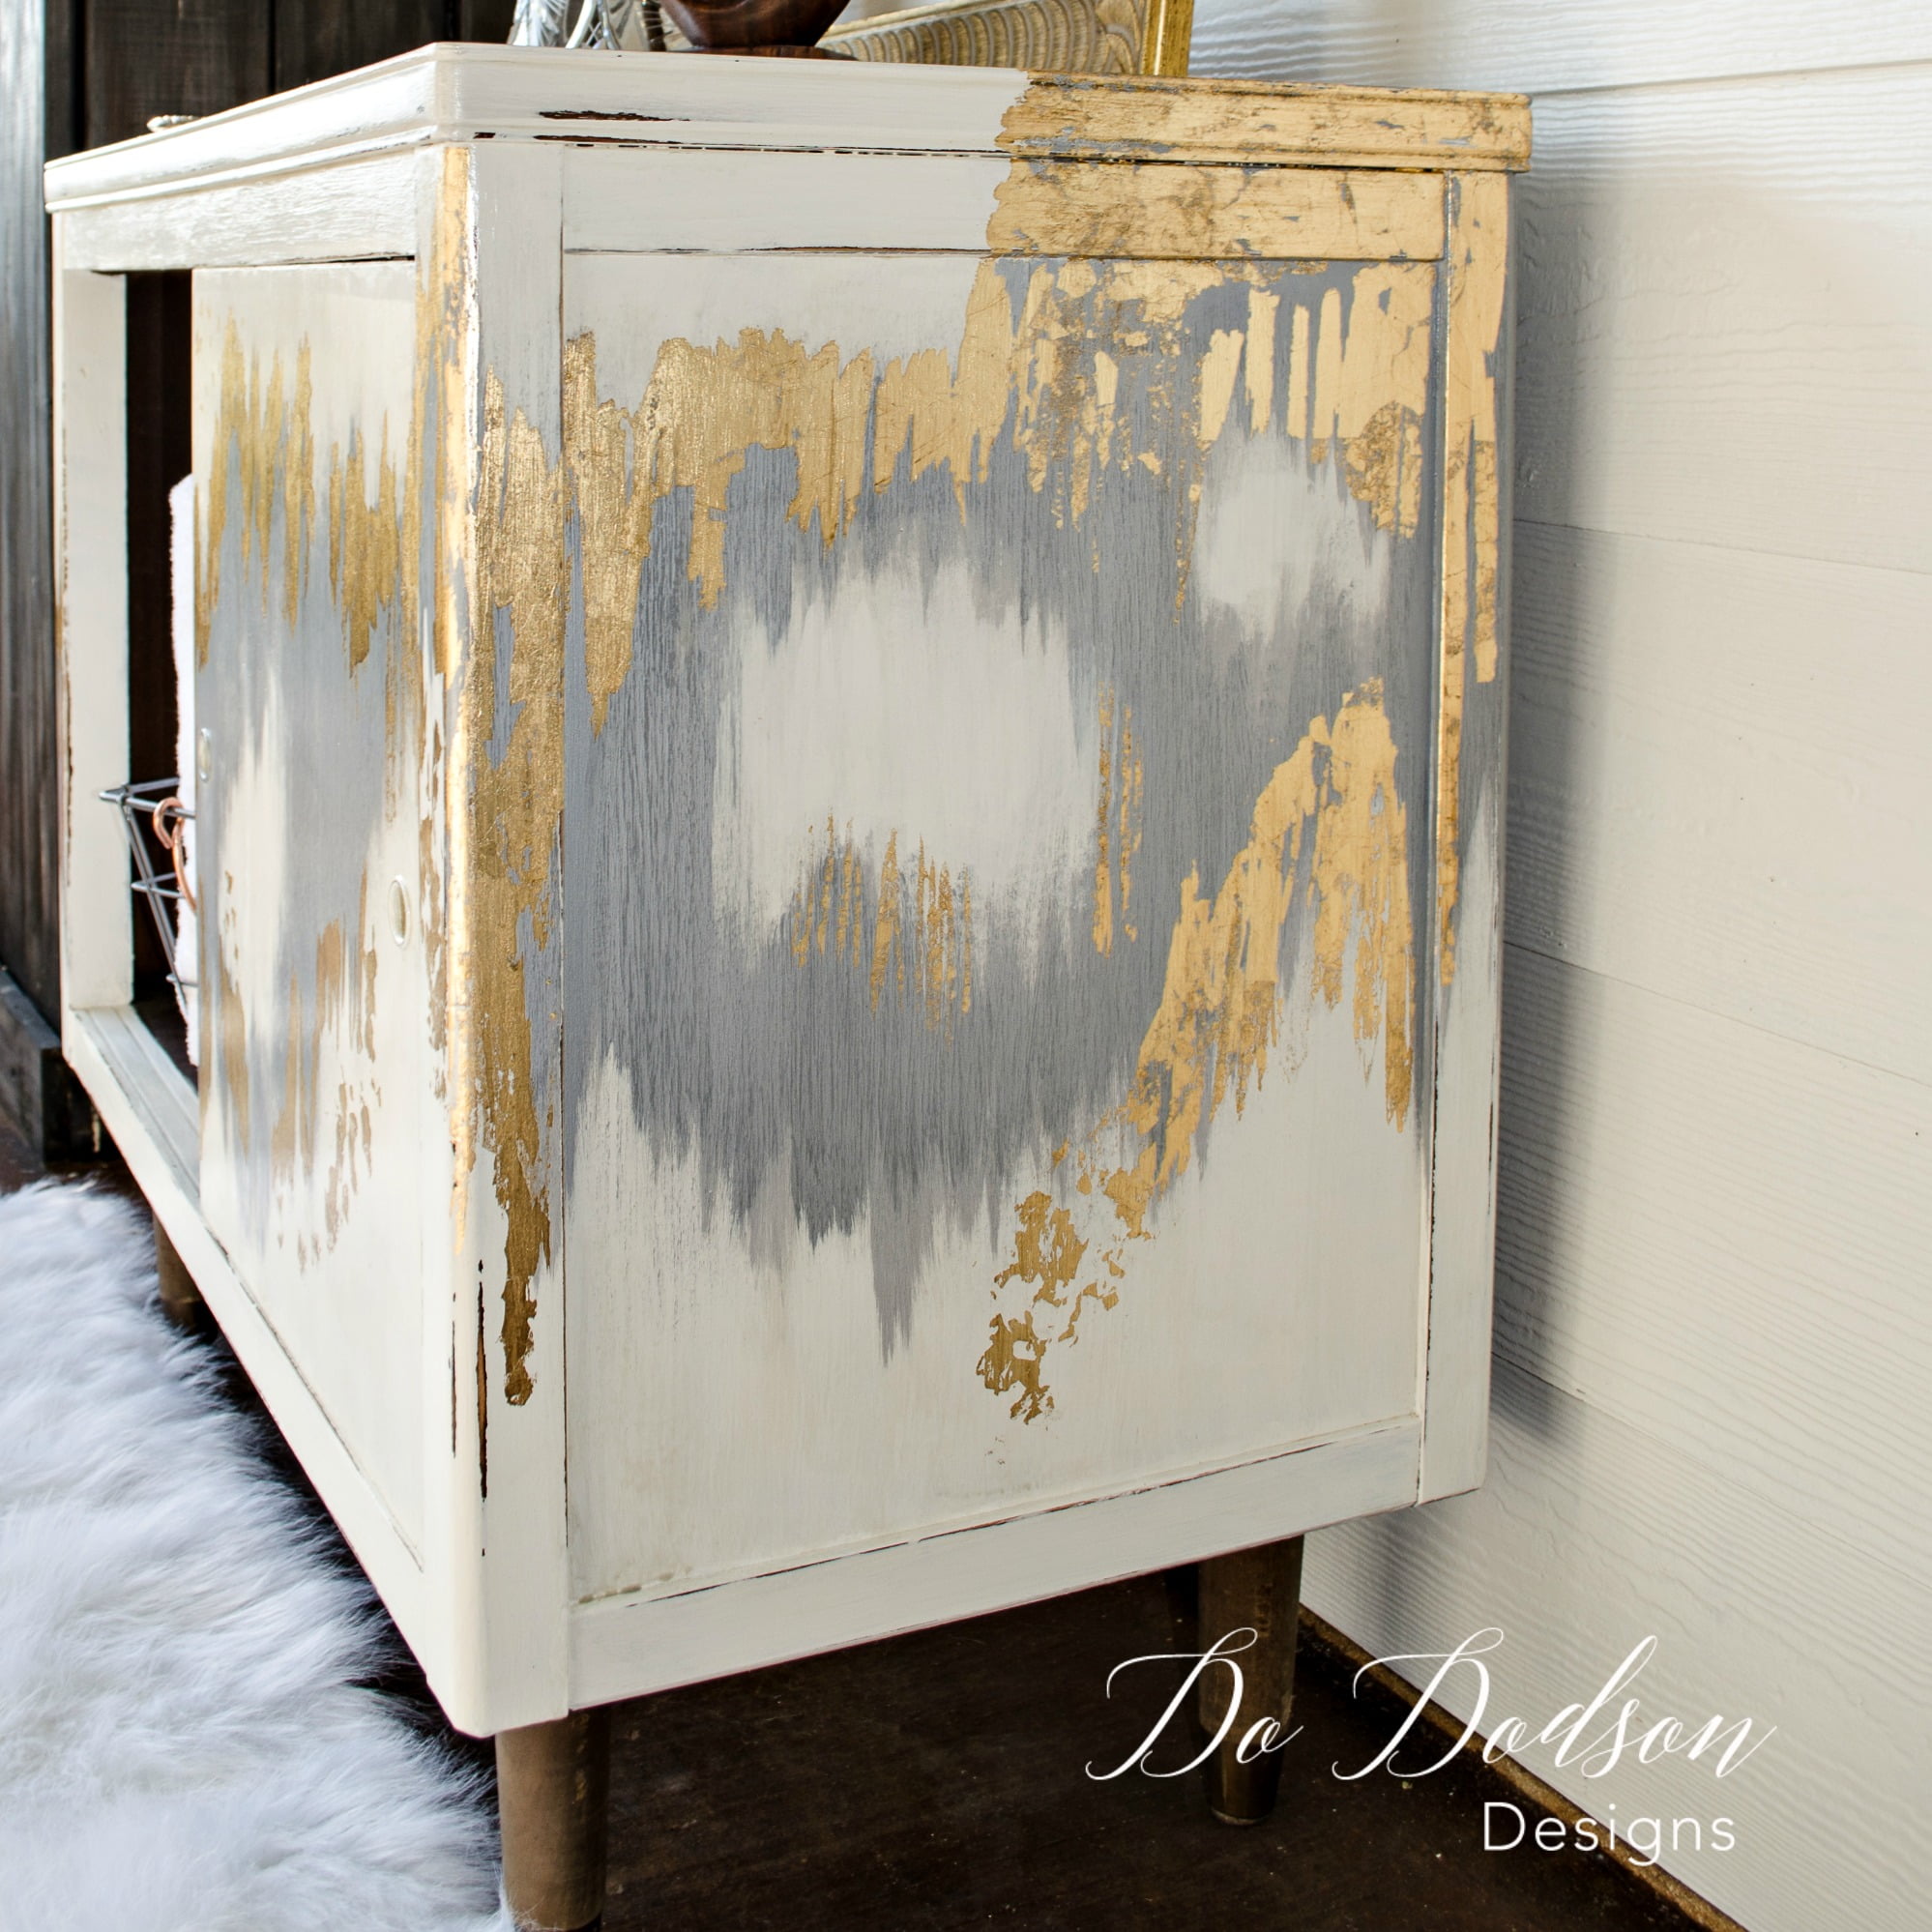 How to Add Gold Leaf to Chalk Paint Furniture - Let's Paint Furniture!